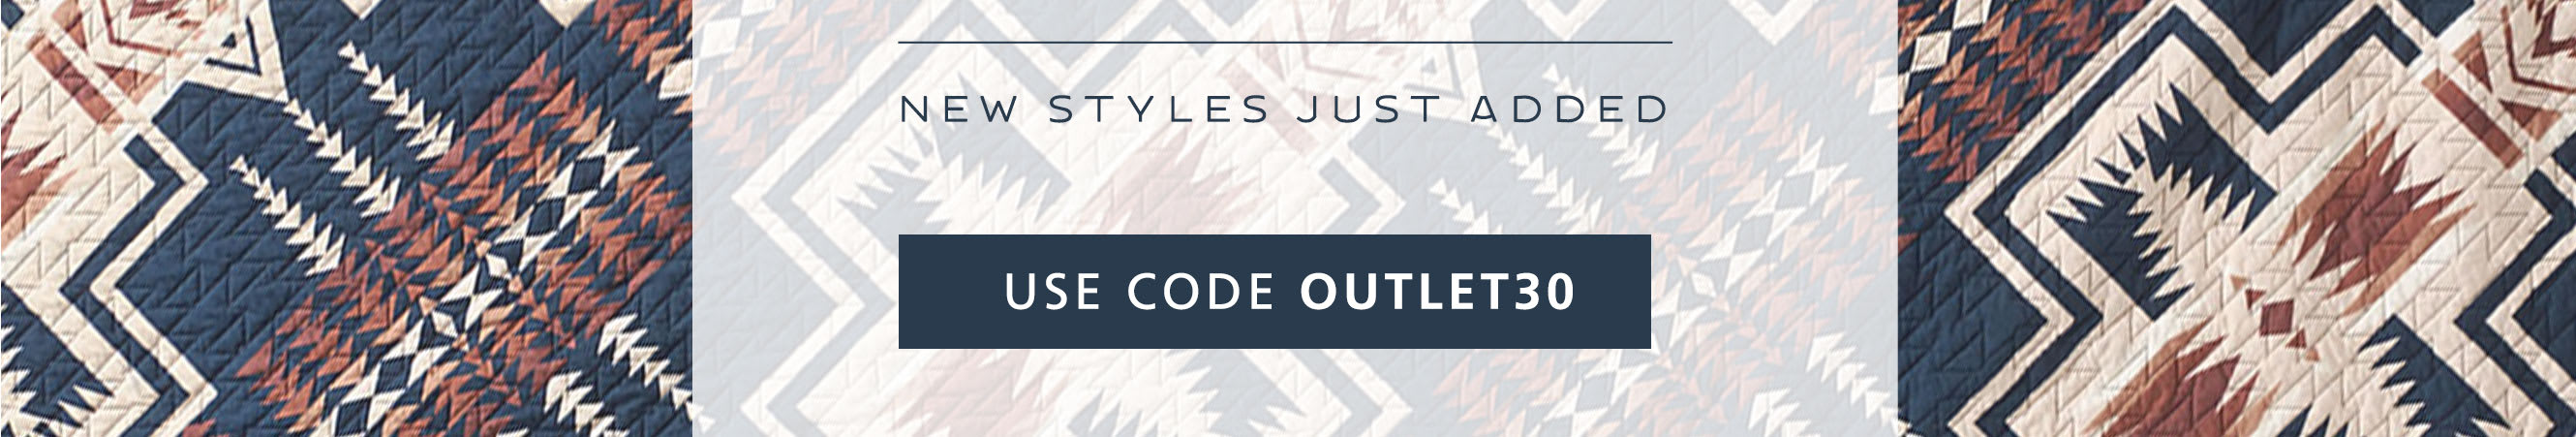 Extra 30% off All Sale Items, New Styles Just Added, Use Code OUTLET30